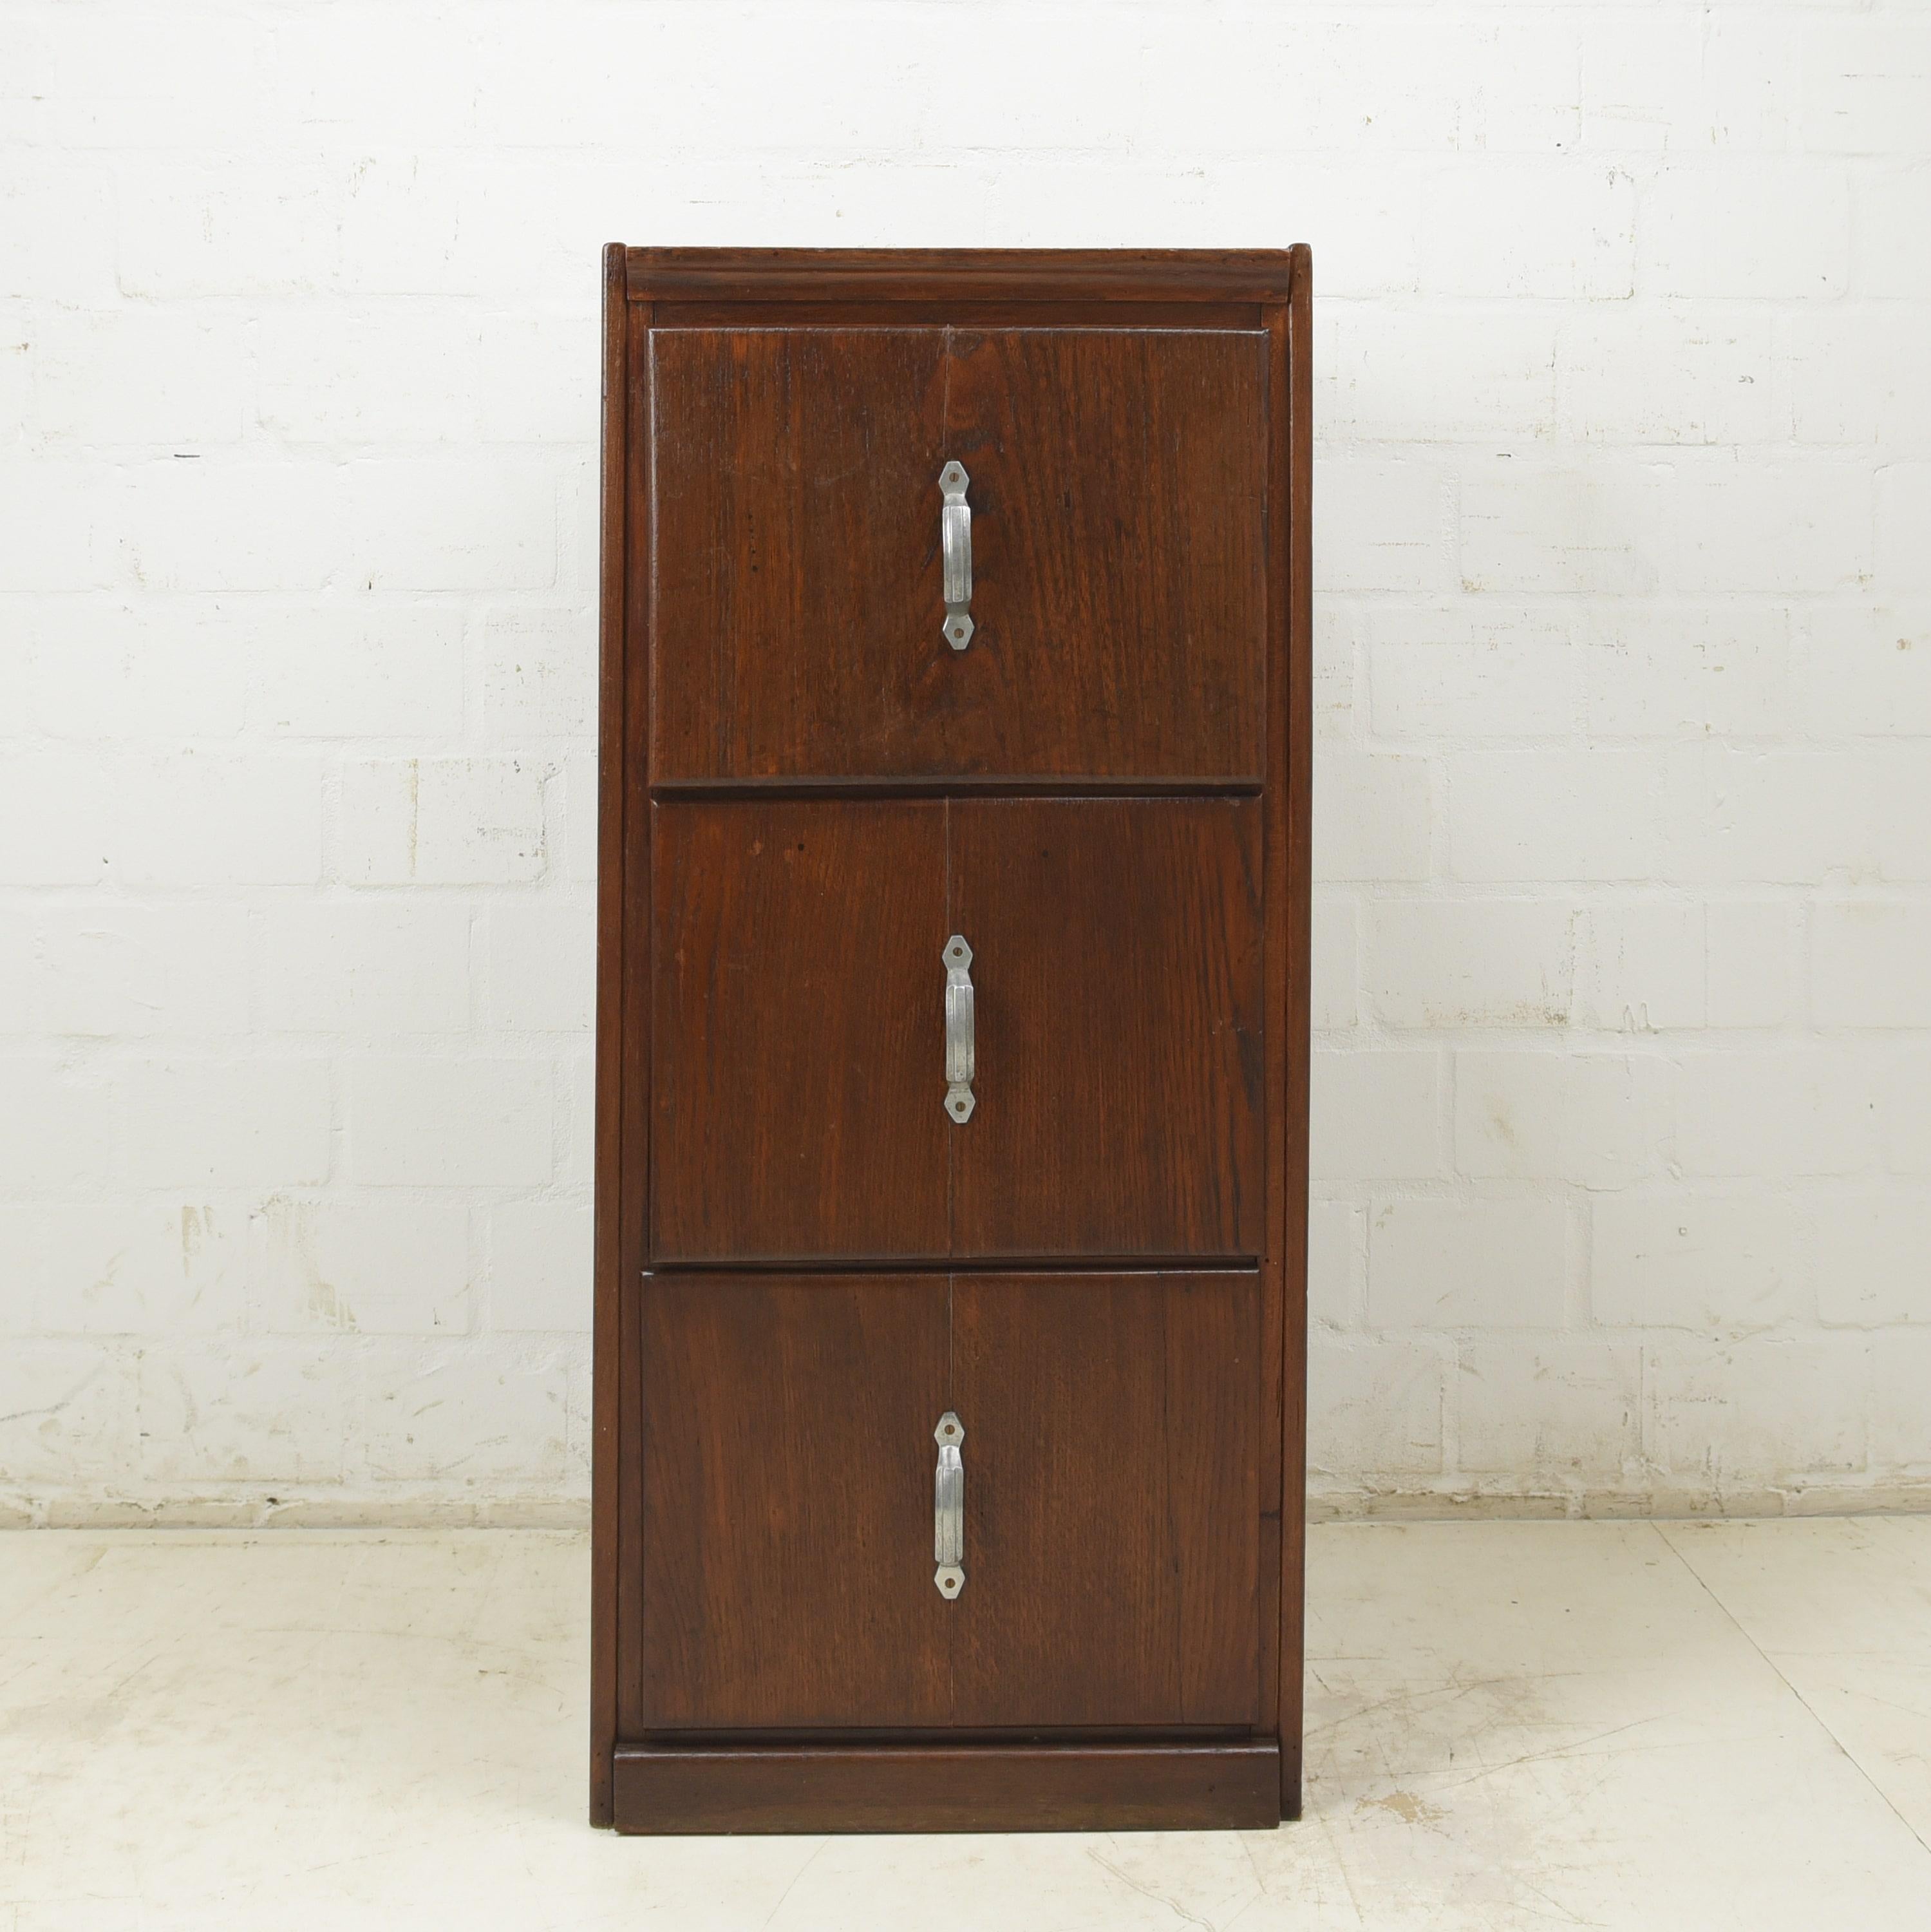 Drawer cabinet restored Bauhaus Art Deco around 1930 small file cabinet

Features:
Three-tier model
Removable drawer bottoms subsequently made from plywood
Original handles
Internal dimensions of drawers approx. HxWxD 26 x 33 x 57cm
Very nice